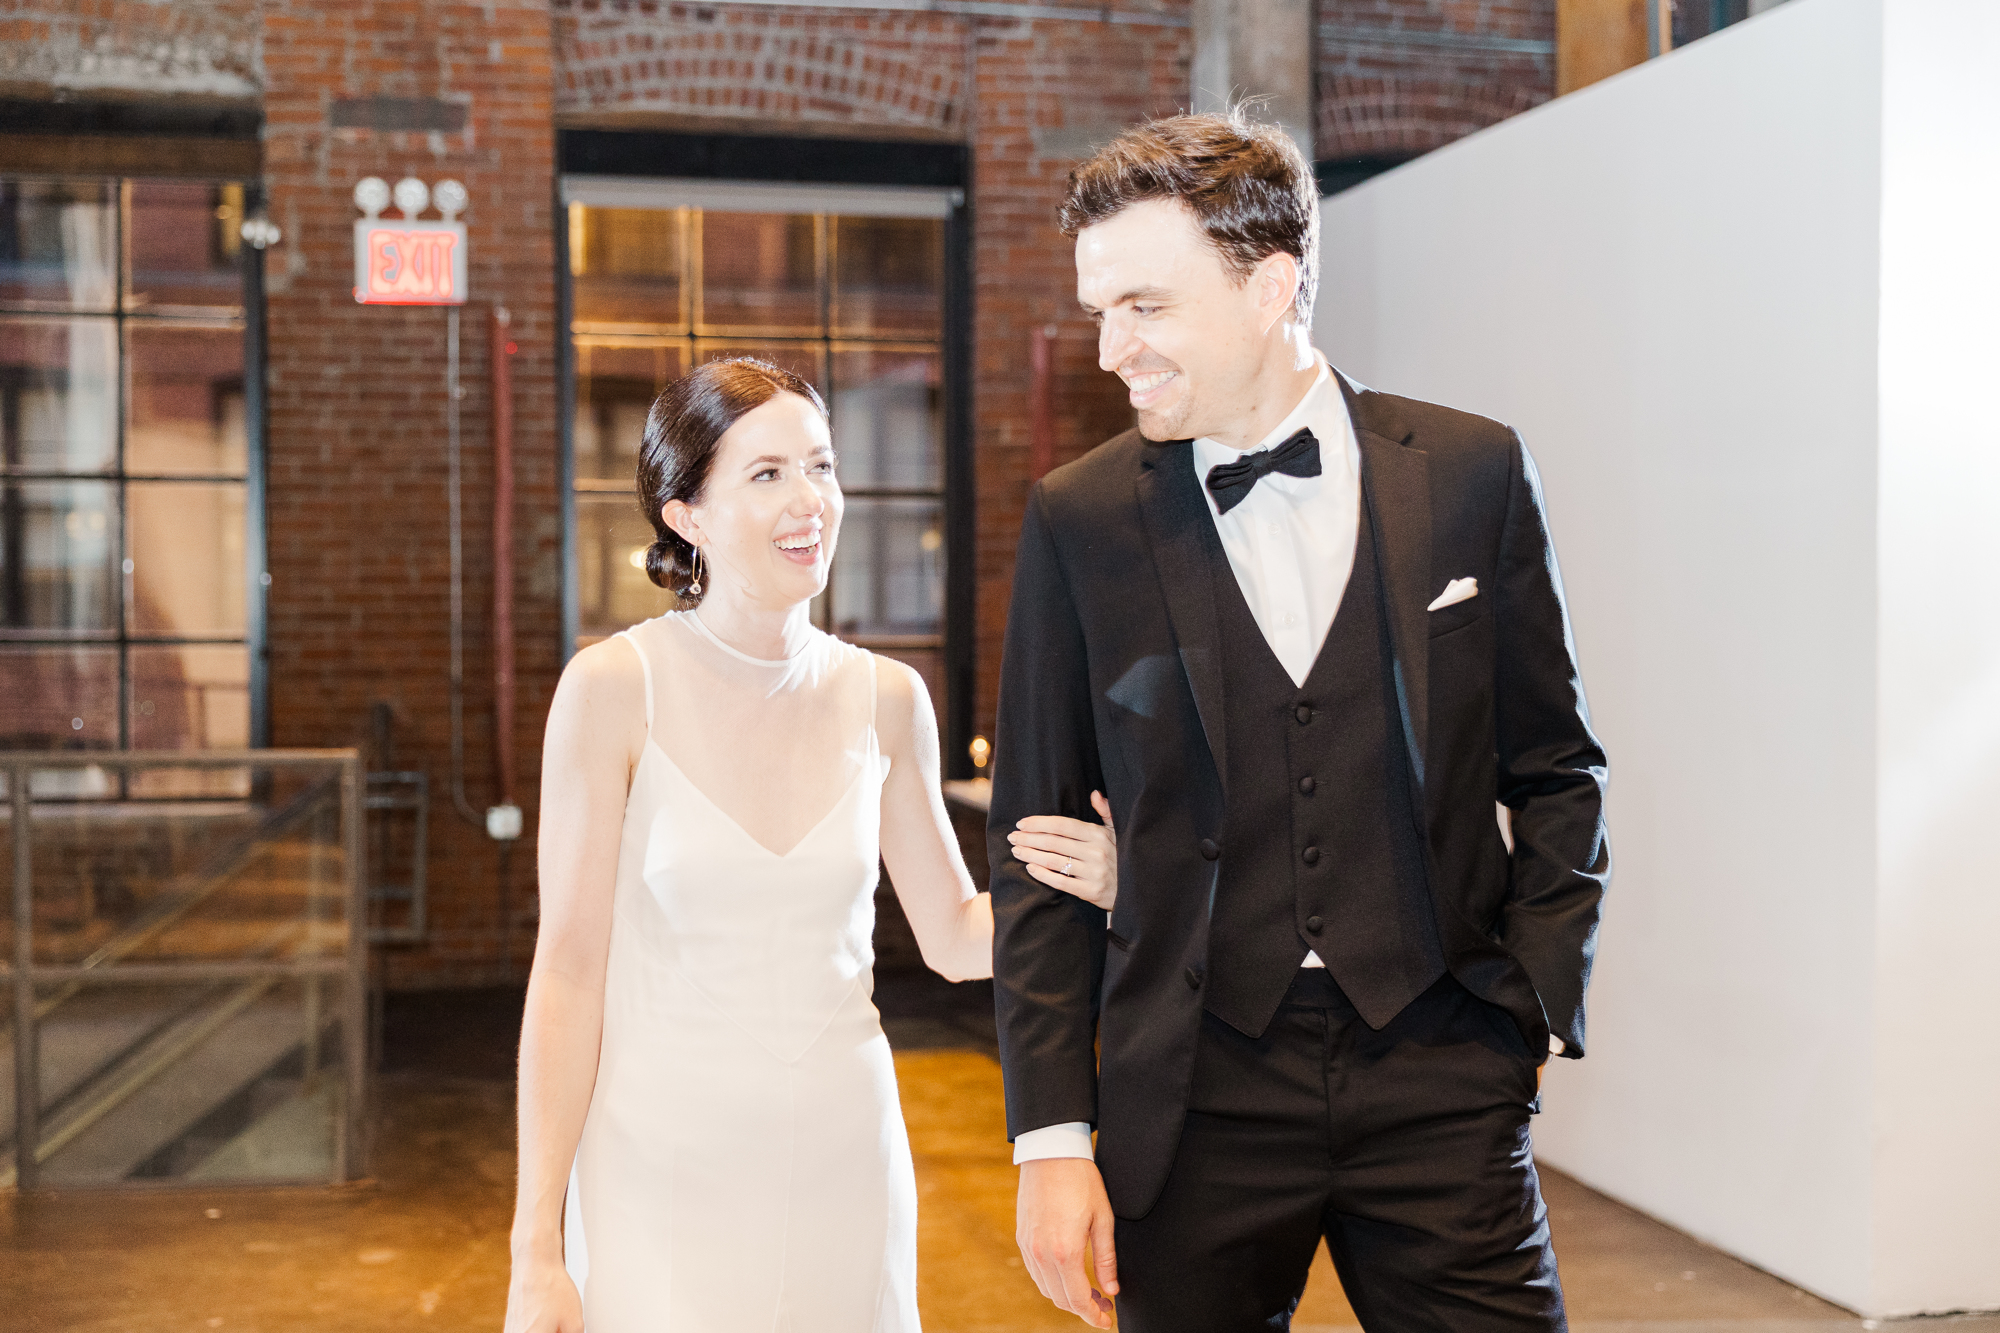 Glowing DUMBO, Brooklyn Wedding Photos at Smack Mellon and Jane's Carousel